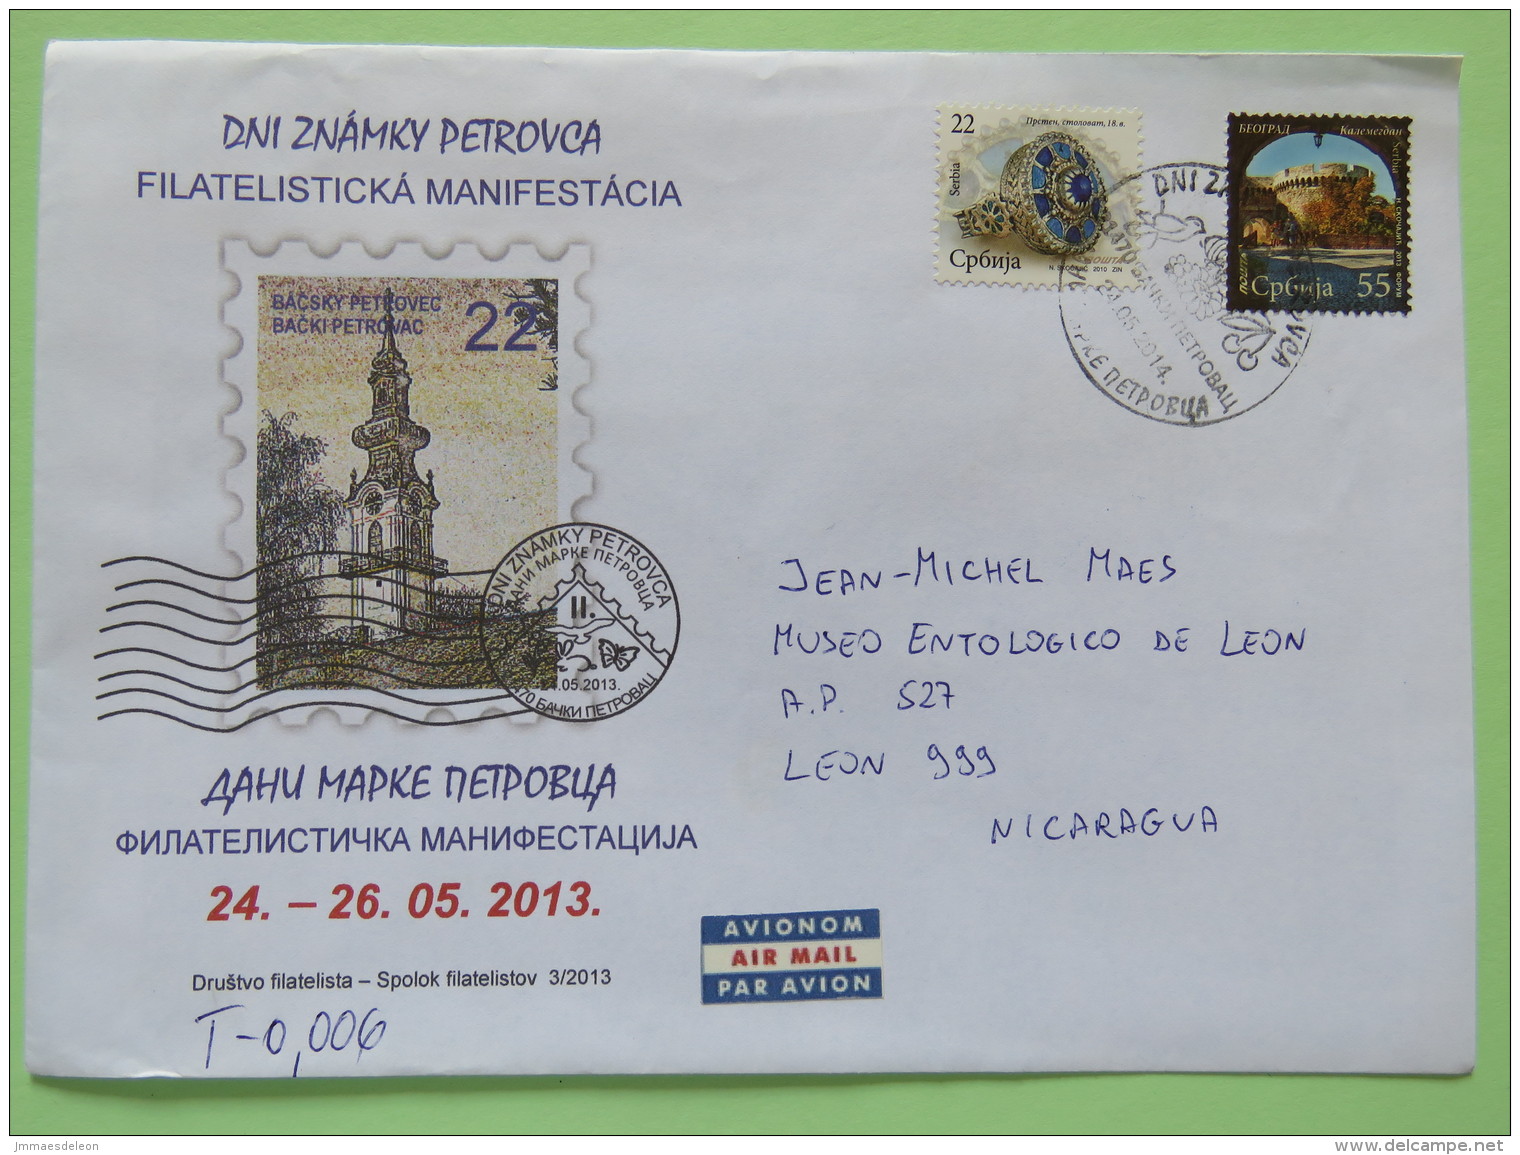 Serbia 2014 Cover Dni Znamky Petrovca To Nicaragua - Castle - Ring Jewelry - Bird And Cherries Cancel - Serbia